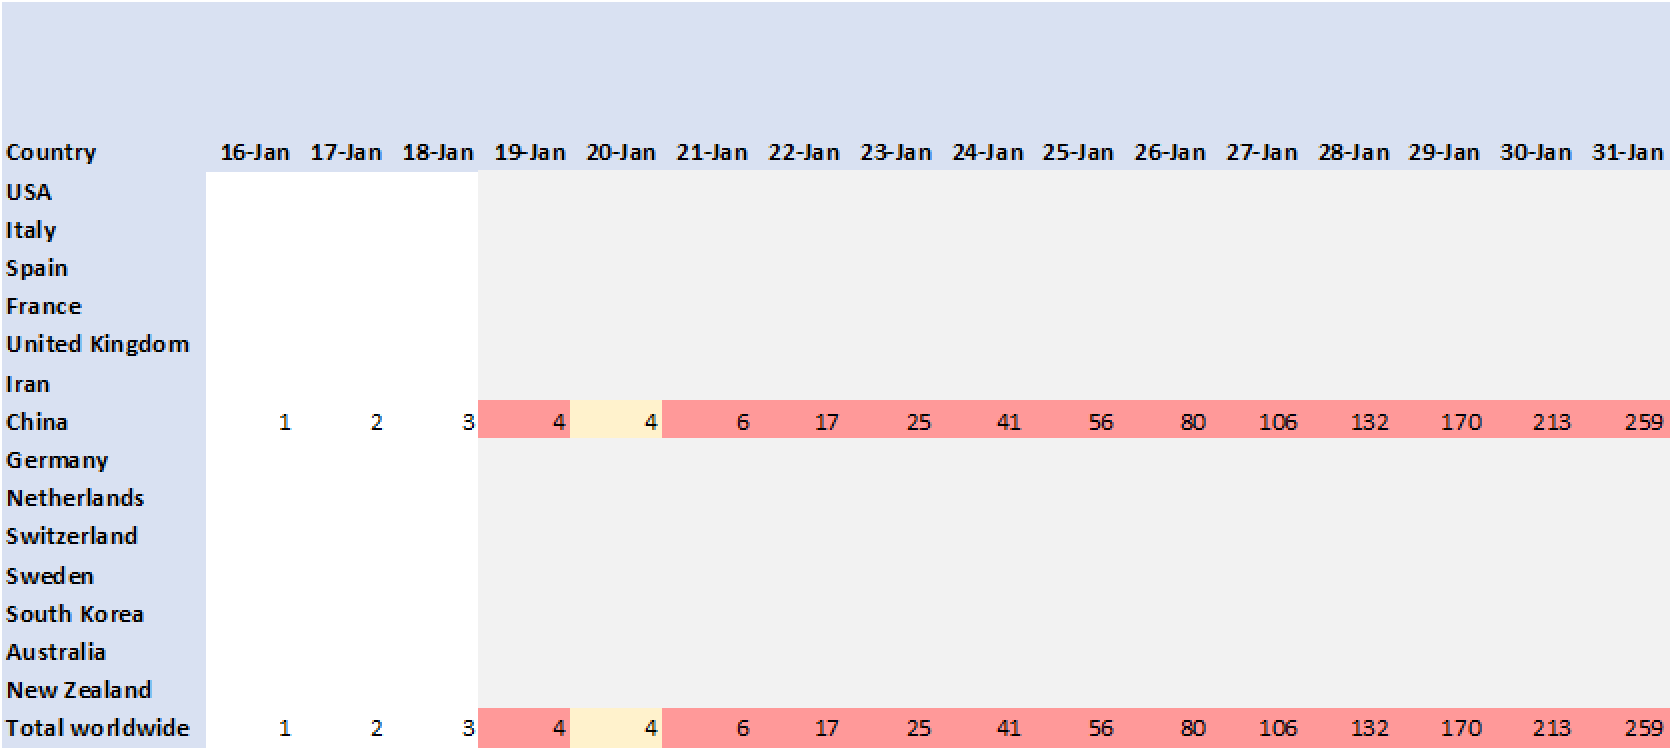 Outcome of death, period 16-Jan-2020 to 31-Jan-2020